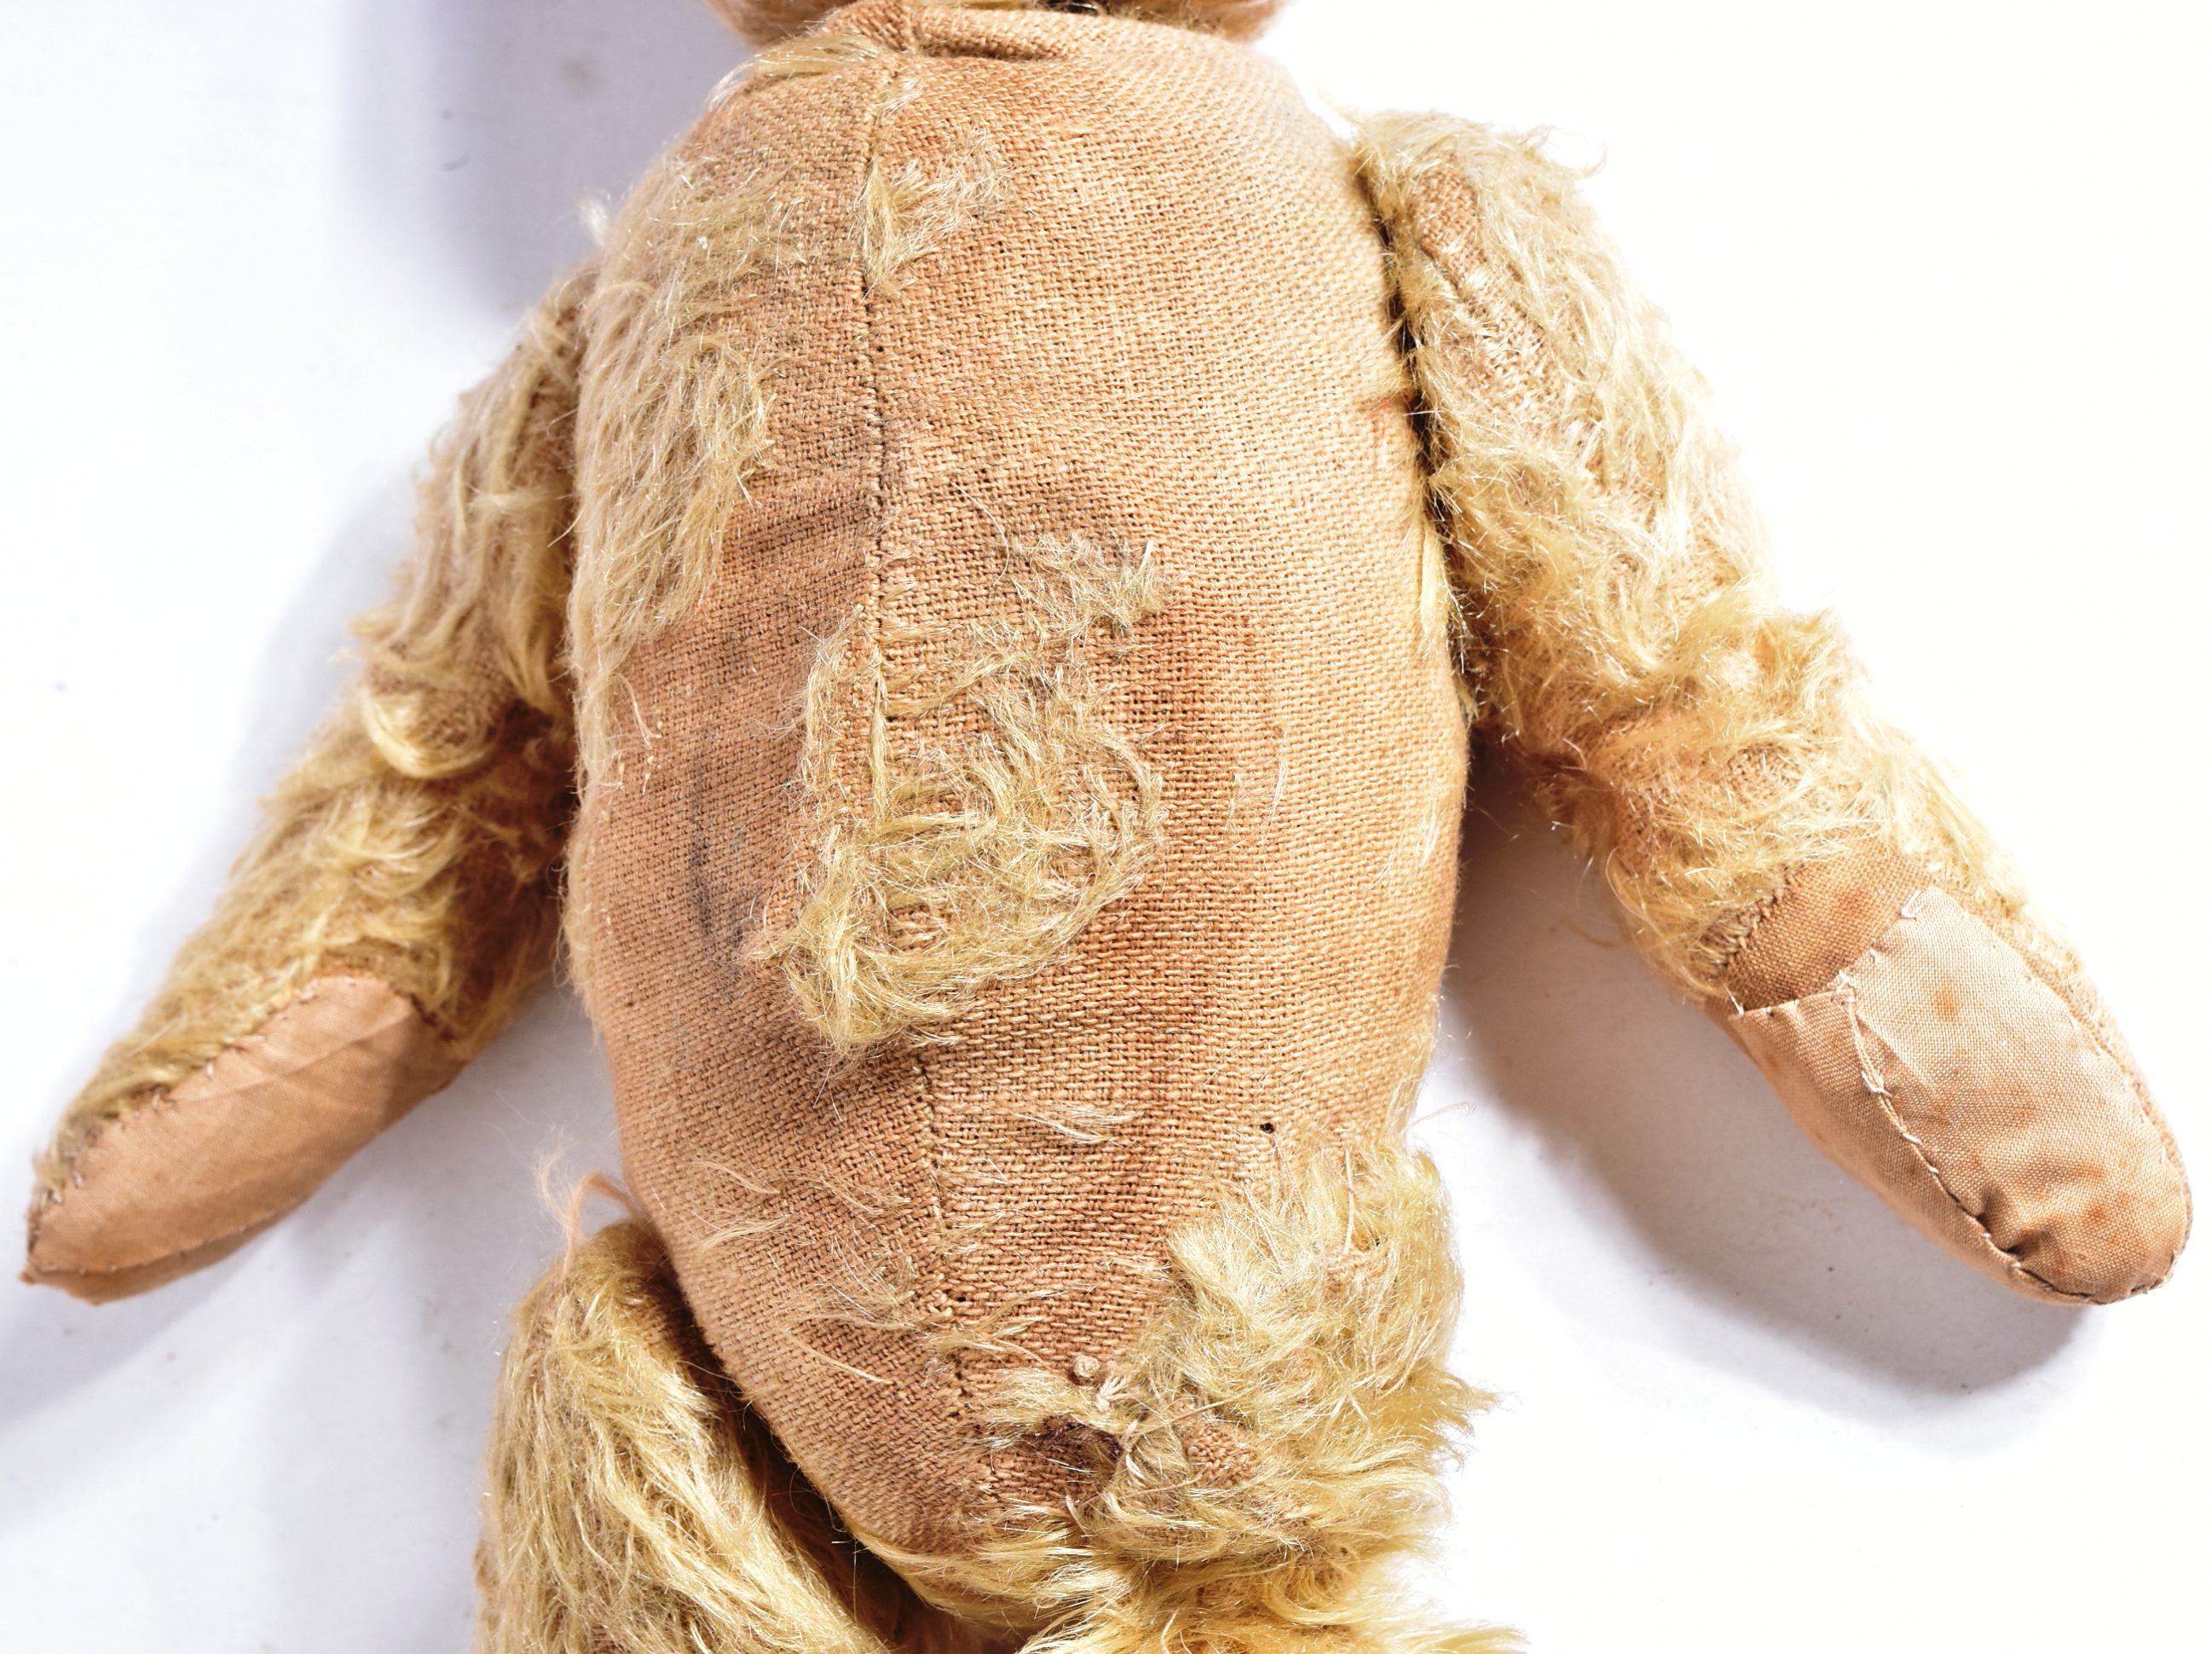 EARLY 20TH CENTURY TEDDY BEAR WITH GROWLER - Image 3 of 5